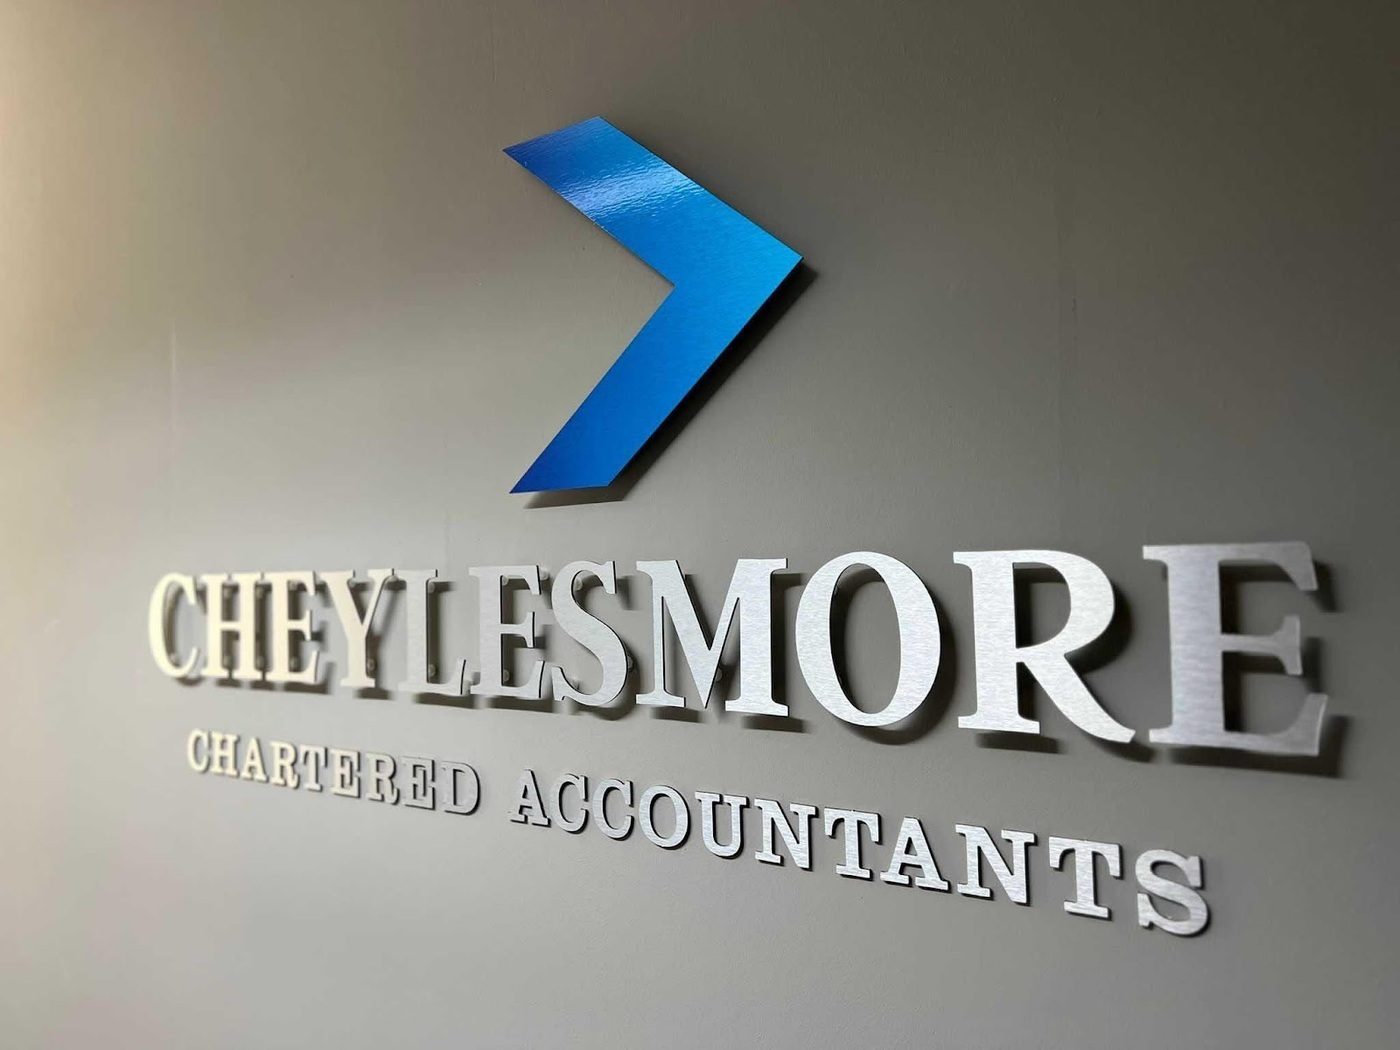 Cheylesmore Accountants is a reputable accounting firm that has been providing trusted services for decades.